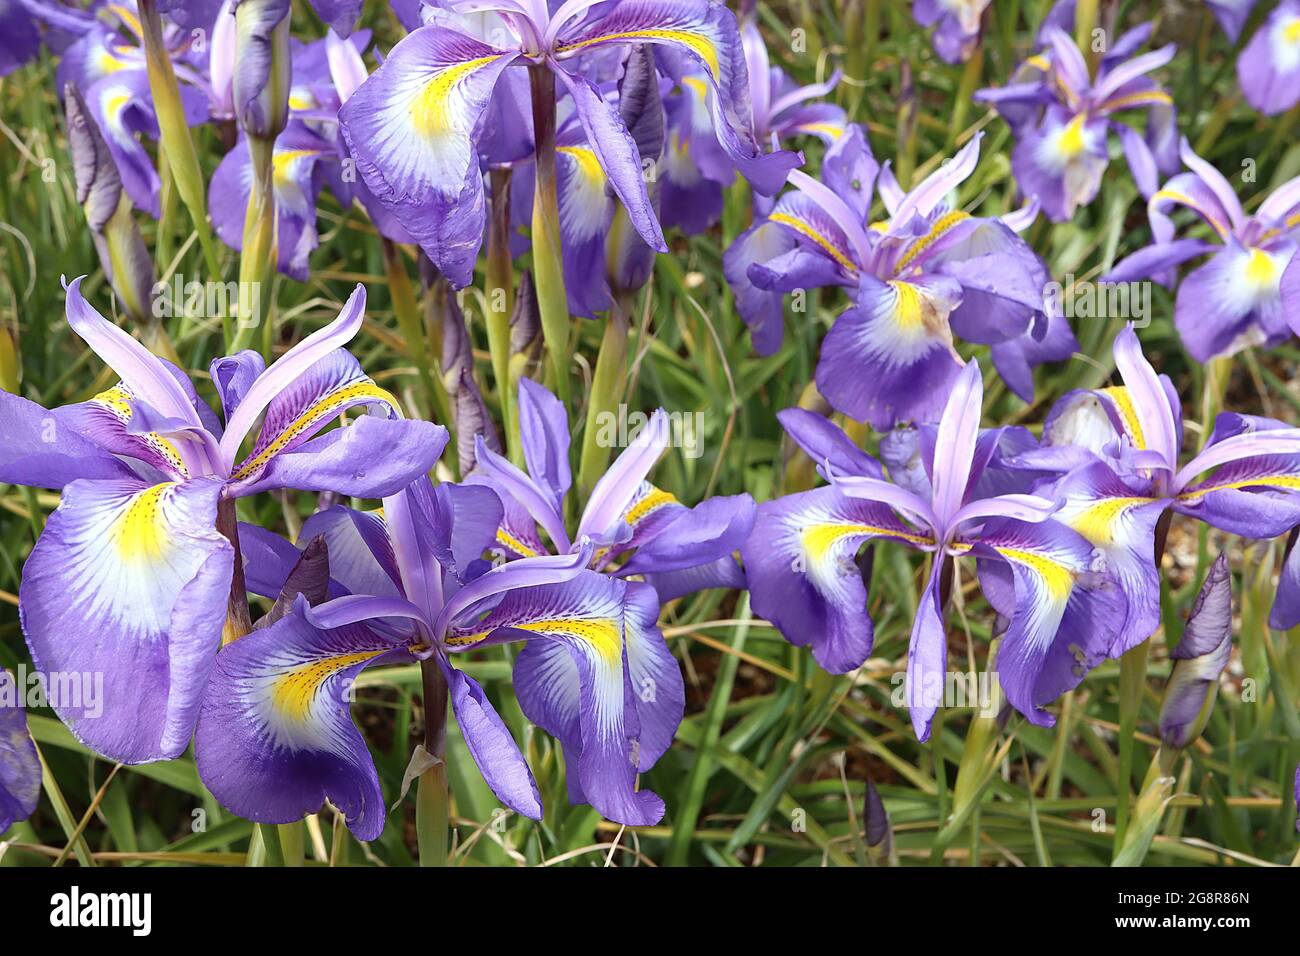 Iris cycloglossa (J) Juno iris Violet falls with white blotch, yellow signal and tiny purple spots, violet standards with white margins,  May, England Stock Photo